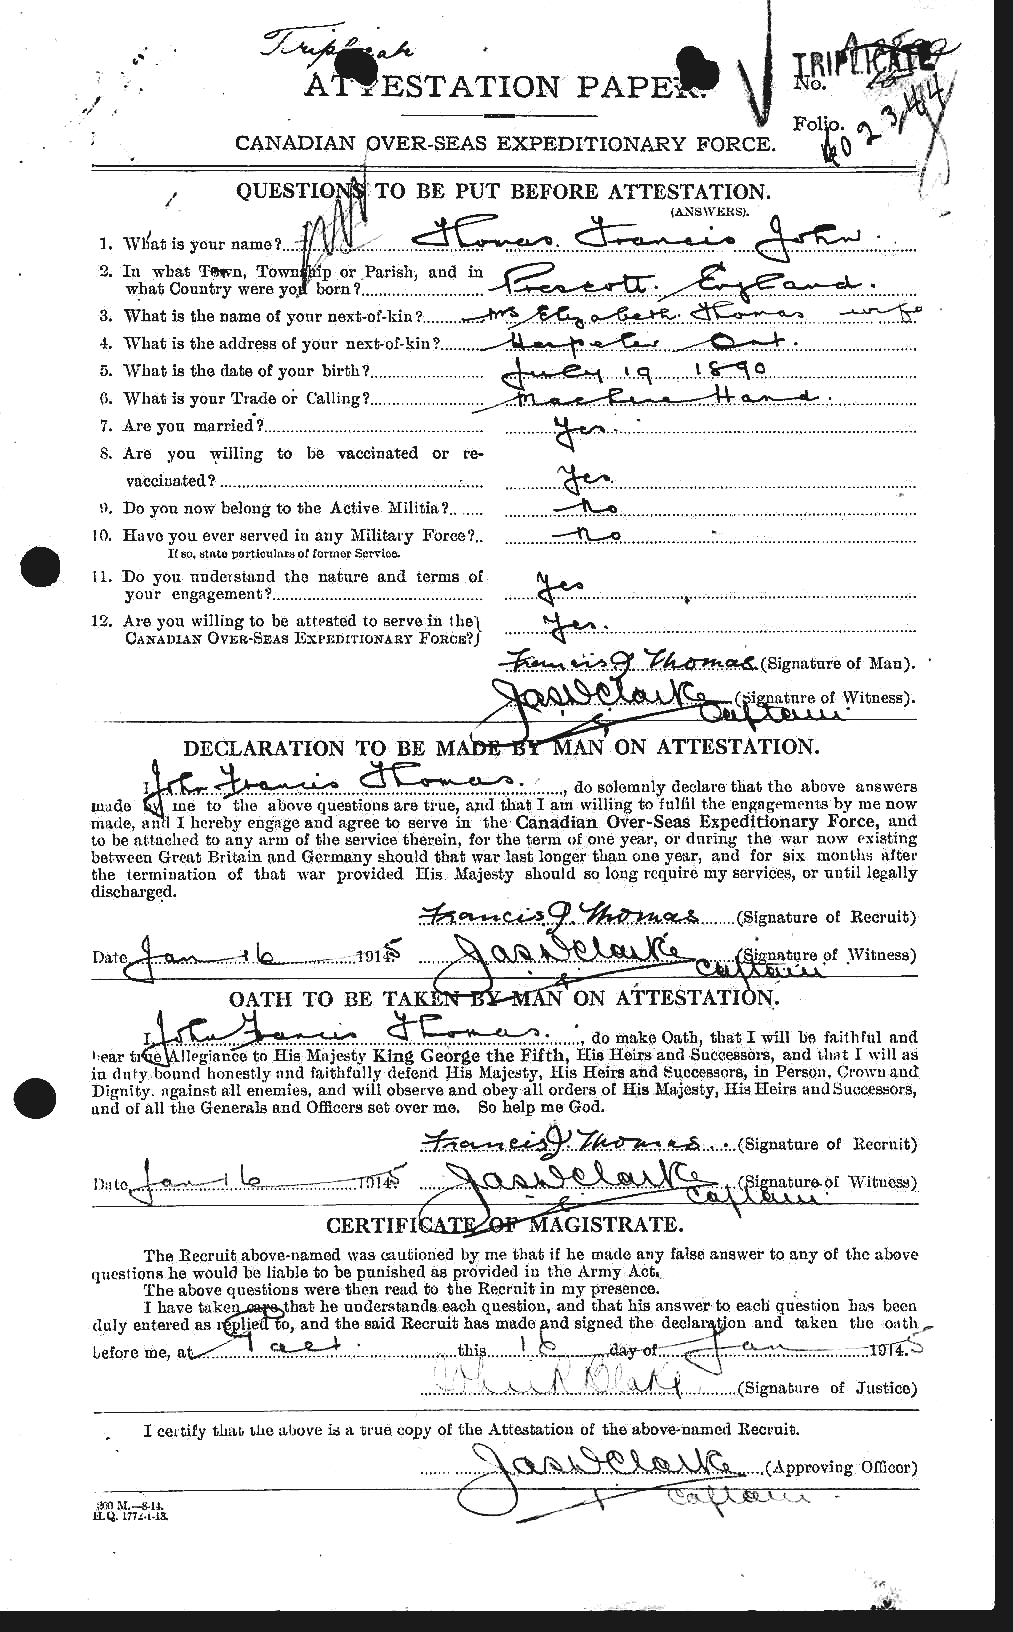 Personnel Records of the First World War - CEF 631582a